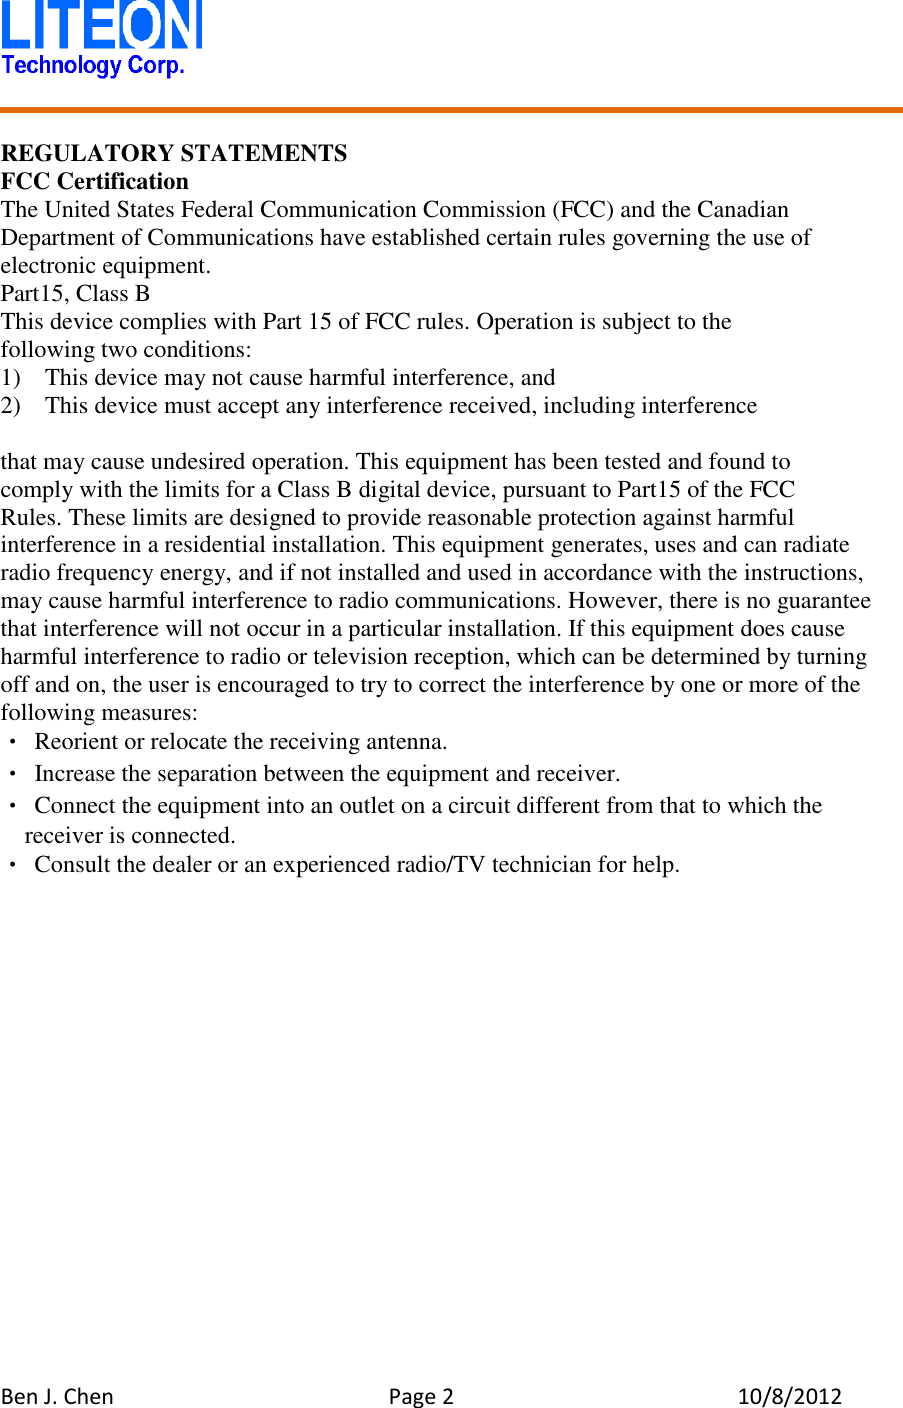   Ben J. Chen  Page 2  10/8/2012    REGULATORY STATEMENTS FCC Certification The United States Federal Communication Commission (FCC) and the Canadian Department of Communications have established certain rules governing the use of electronic equipment. Part15, Class B This device complies with Part 15 of FCC rules. Operation is subject to the following two conditions: 1)    This device may not cause harmful interference, and 2)    This device must accept any interference received, including interference  that may cause undesired operation. This equipment has been tested and found to   comply with the limits for a Class B digital device, pursuant to Part15 of the FCC   Rules. These limits are designed to provide reasonable protection against harmful interference in a residential installation. This equipment generates, uses and can radiate radio frequency energy, and if not installed and used in accordance with the instructions, may cause harmful interference to radio communications. However, there is no guarantee that interference will not occur in a particular installation. If this equipment does cause harmful interference to radio or television reception, which can be determined by turning off and on, the user is encouraged to try to correct the interference by one or more of the following measures: • Reorient or relocate the receiving antenna. • Increase the separation between the equipment and receiver. • Connect the equipment into an outlet on a circuit different from that to which the receiver is connected. • Consult the dealer or an experienced radio/TV technician for help.    